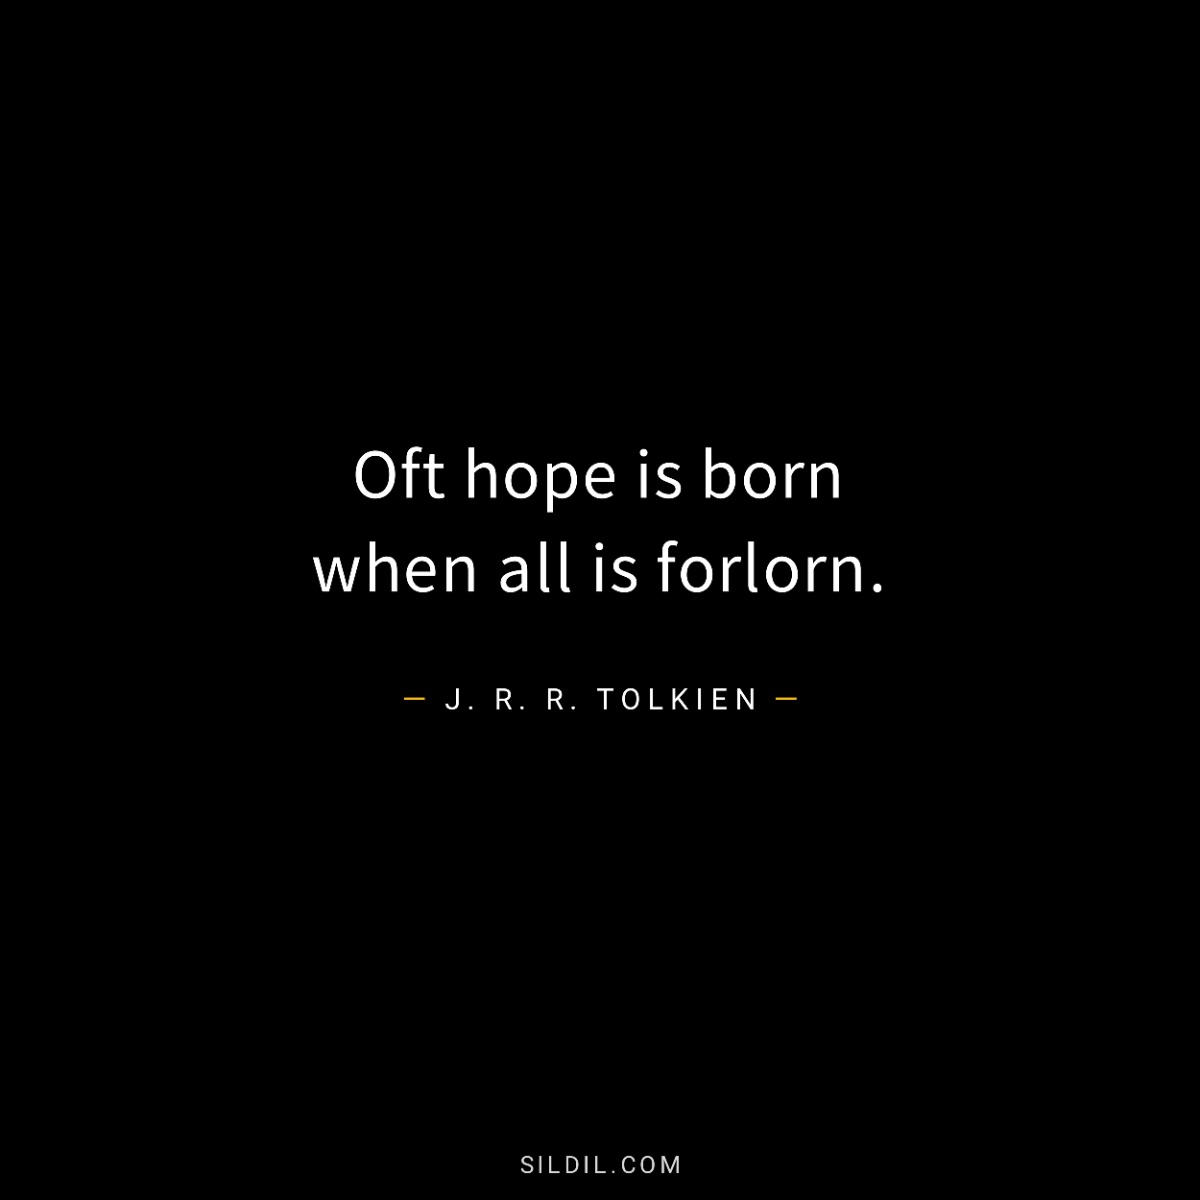 Oft hope is born when all is forlorn.